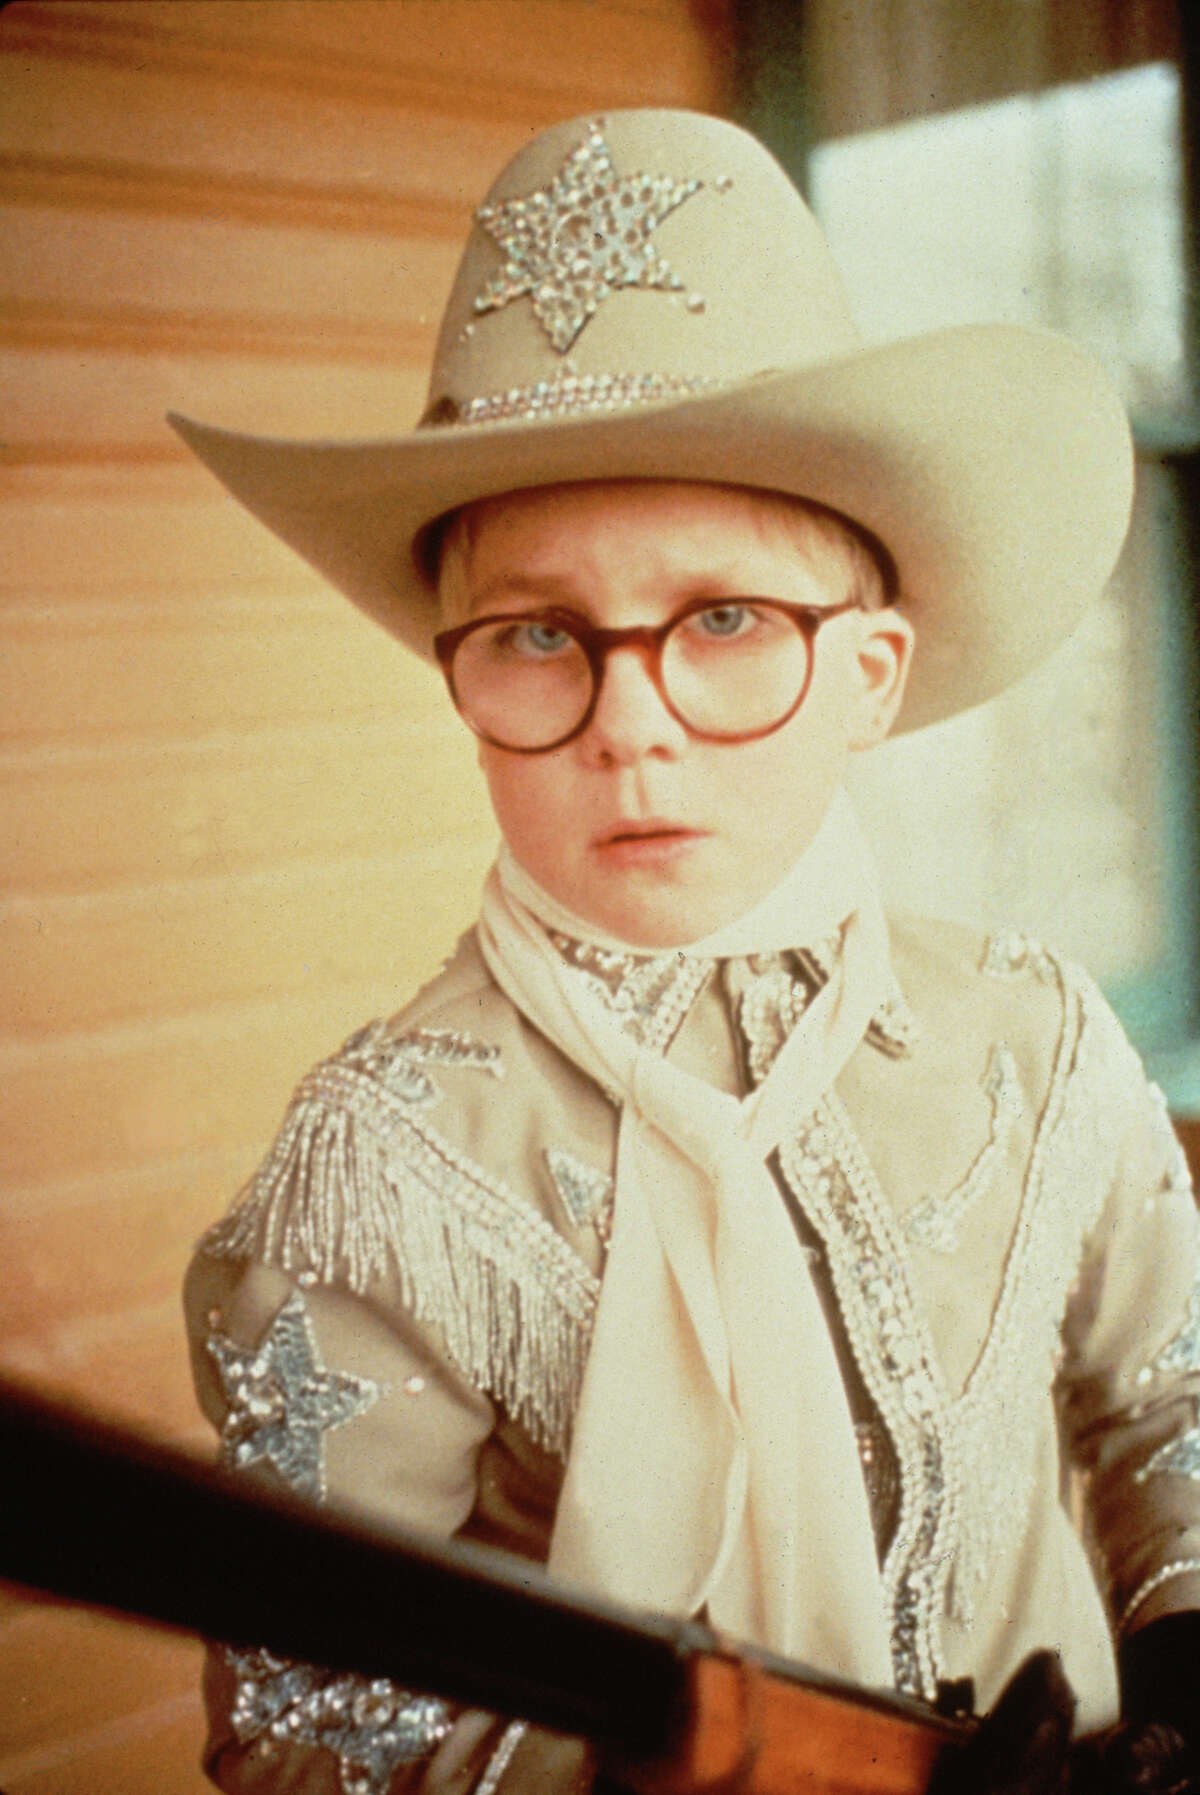 Peter Billingsley as Ralphie in the film "A Christmas Story." TBS will air this classic several times. Mon 12/24 at 9:00 pm, Mon 12/24 at 11:00 pm, Tue 12/25 at 1:00 am, Tue 12/25 at 3:00 am, Tue 12/25 at 5:00 am, Tue 12/25 at 7:00 am, Tue 12/25 at 9:00 am, Tue 12/25 at 11:00 pm, Tue 12/25 at 1:00 pm, Tue 12/25 at 3:00 pm, Tue 12/25 at 5:00 pm.